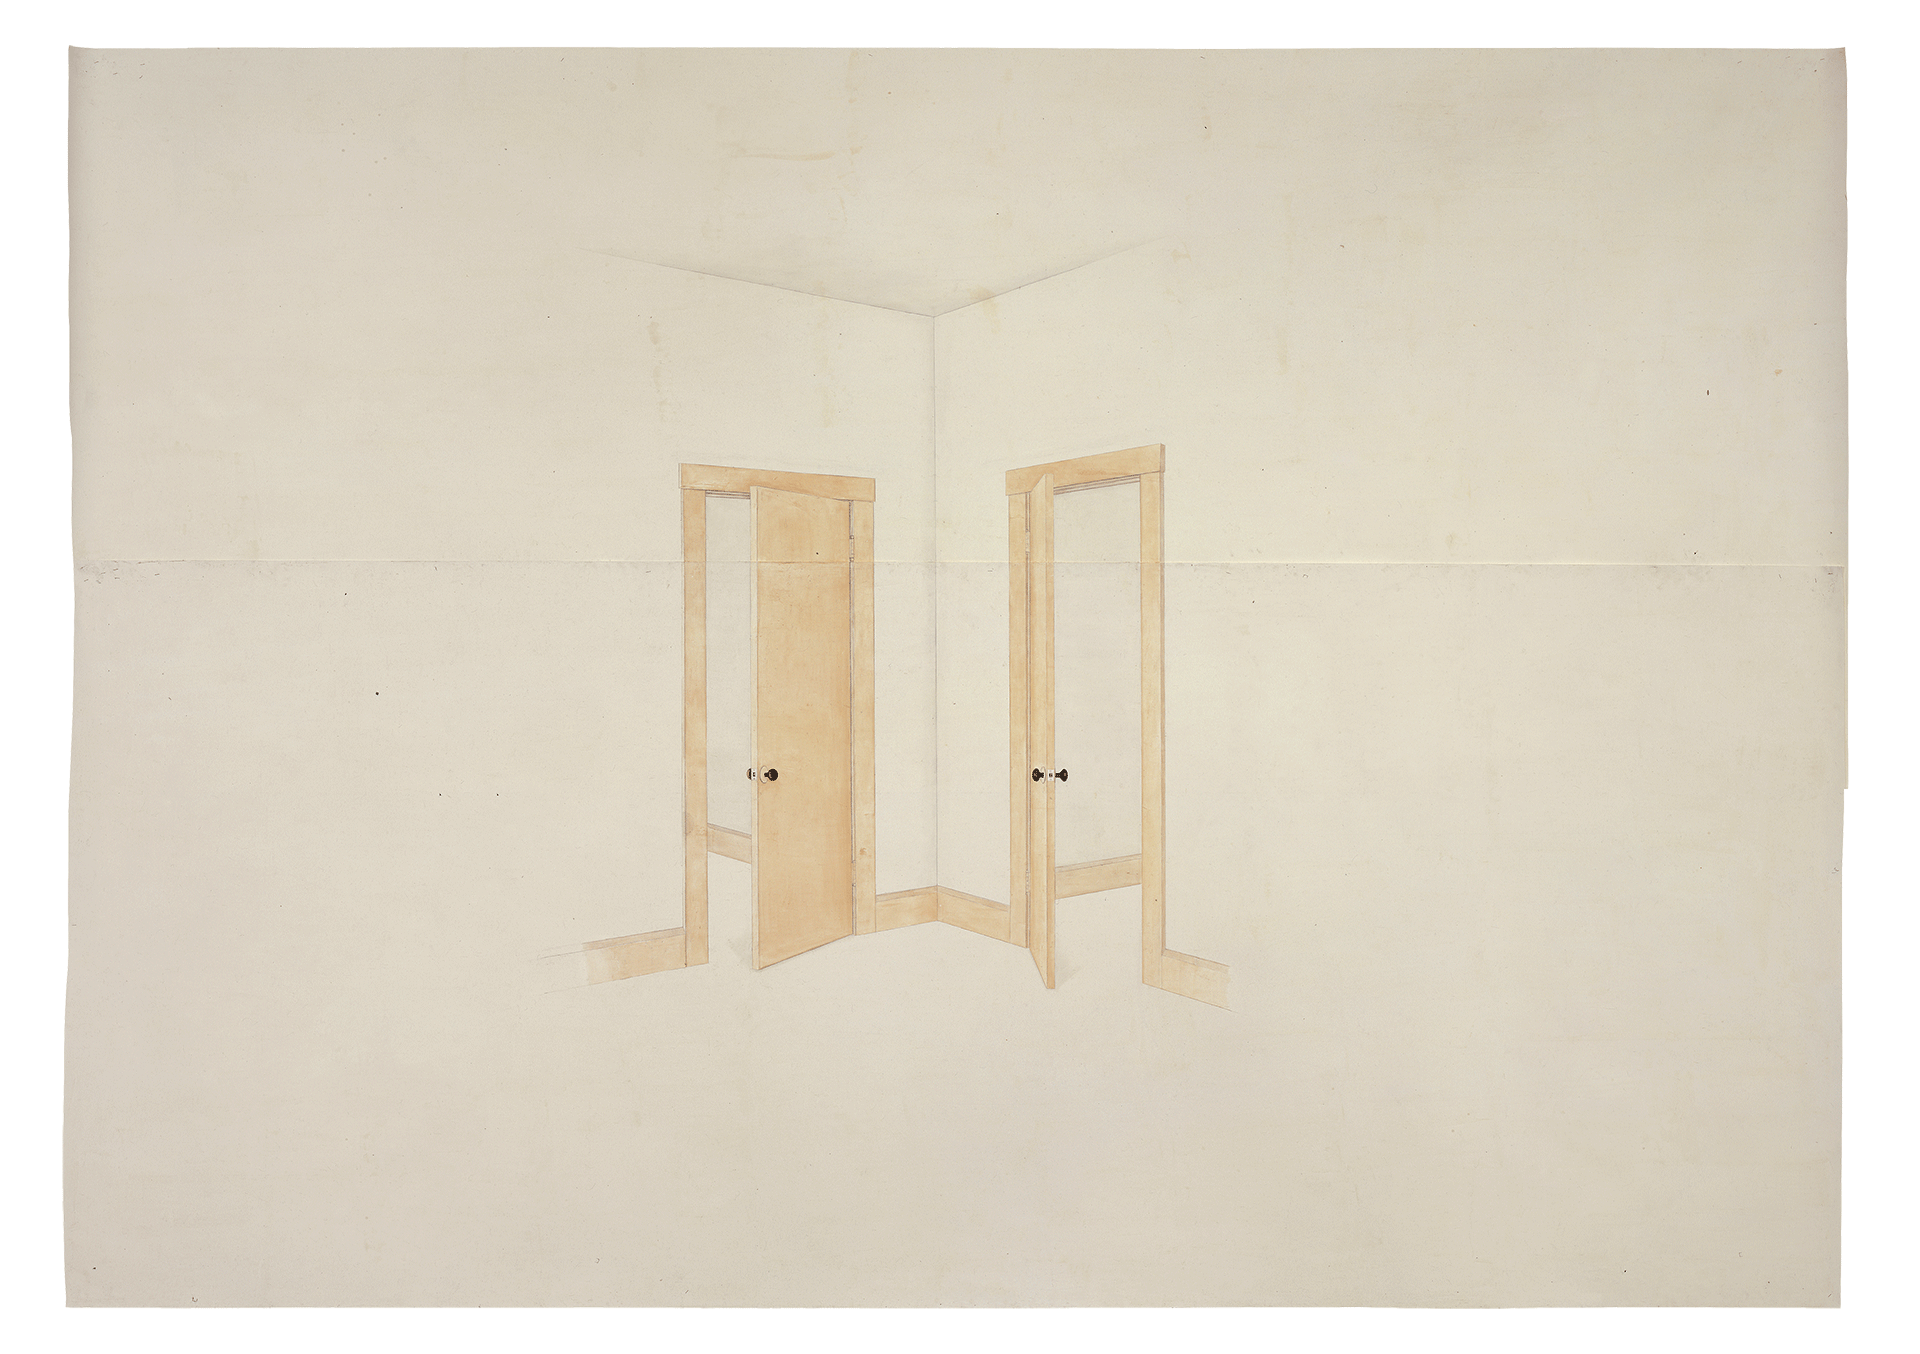 An oil and wax work on paper by Toba Khedoori, titled Untitled (doors), dated 1999.